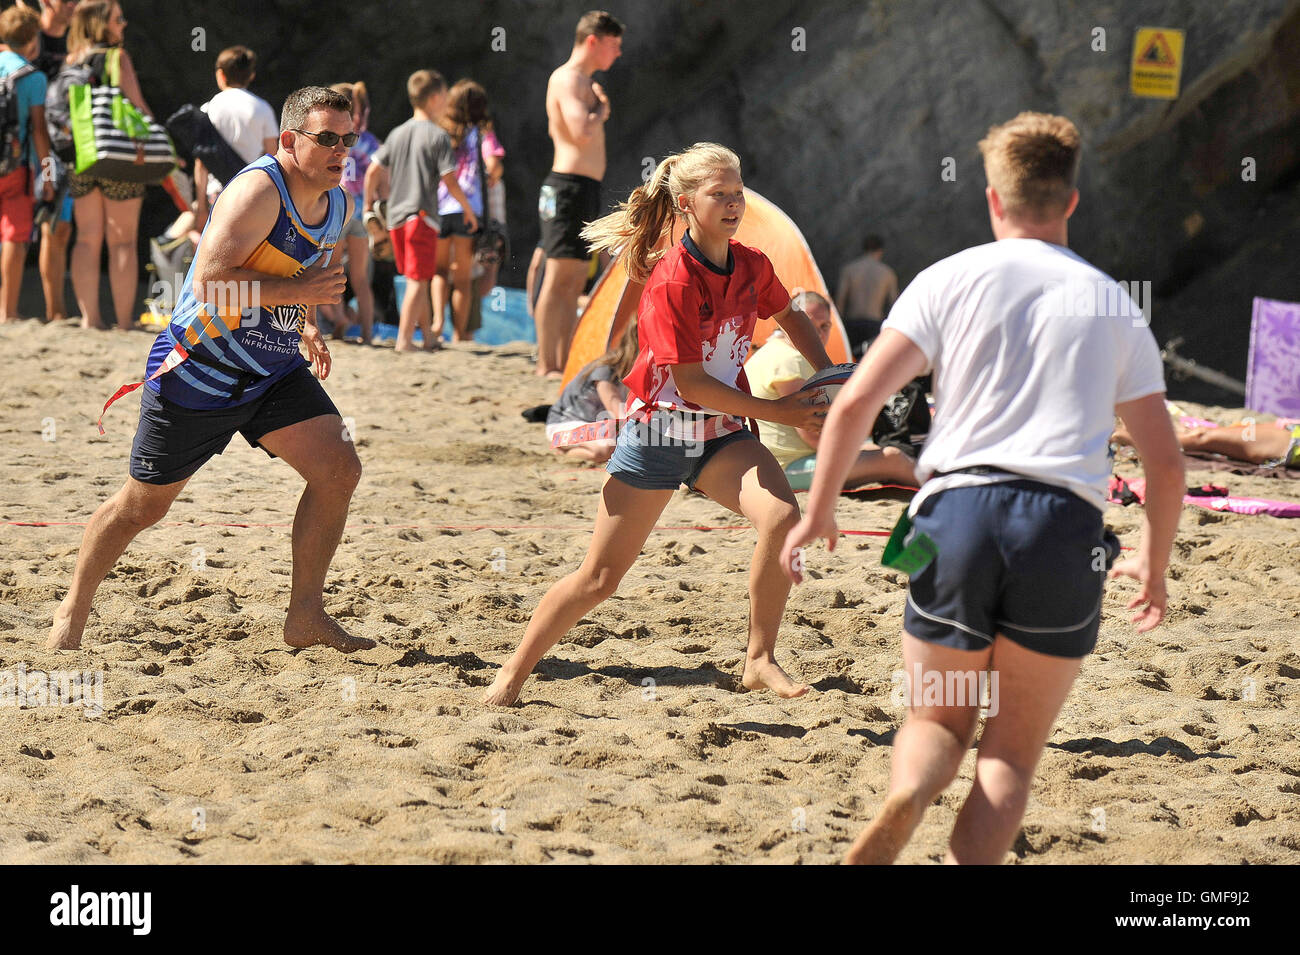 Newquay, UK. 26th Aug, 2016. Lusty Glaze, Newquay, Cornwall. 26th August, 2016. Blessed with beautiful sunny weather, teams of all ages and genders battle it out to become the Beach Tag Rugby Champions at the Lusty Glaze annual Bank Holiday event. Photographer Credit:  Gordon Scammell/Alamy Live News Stock Photo